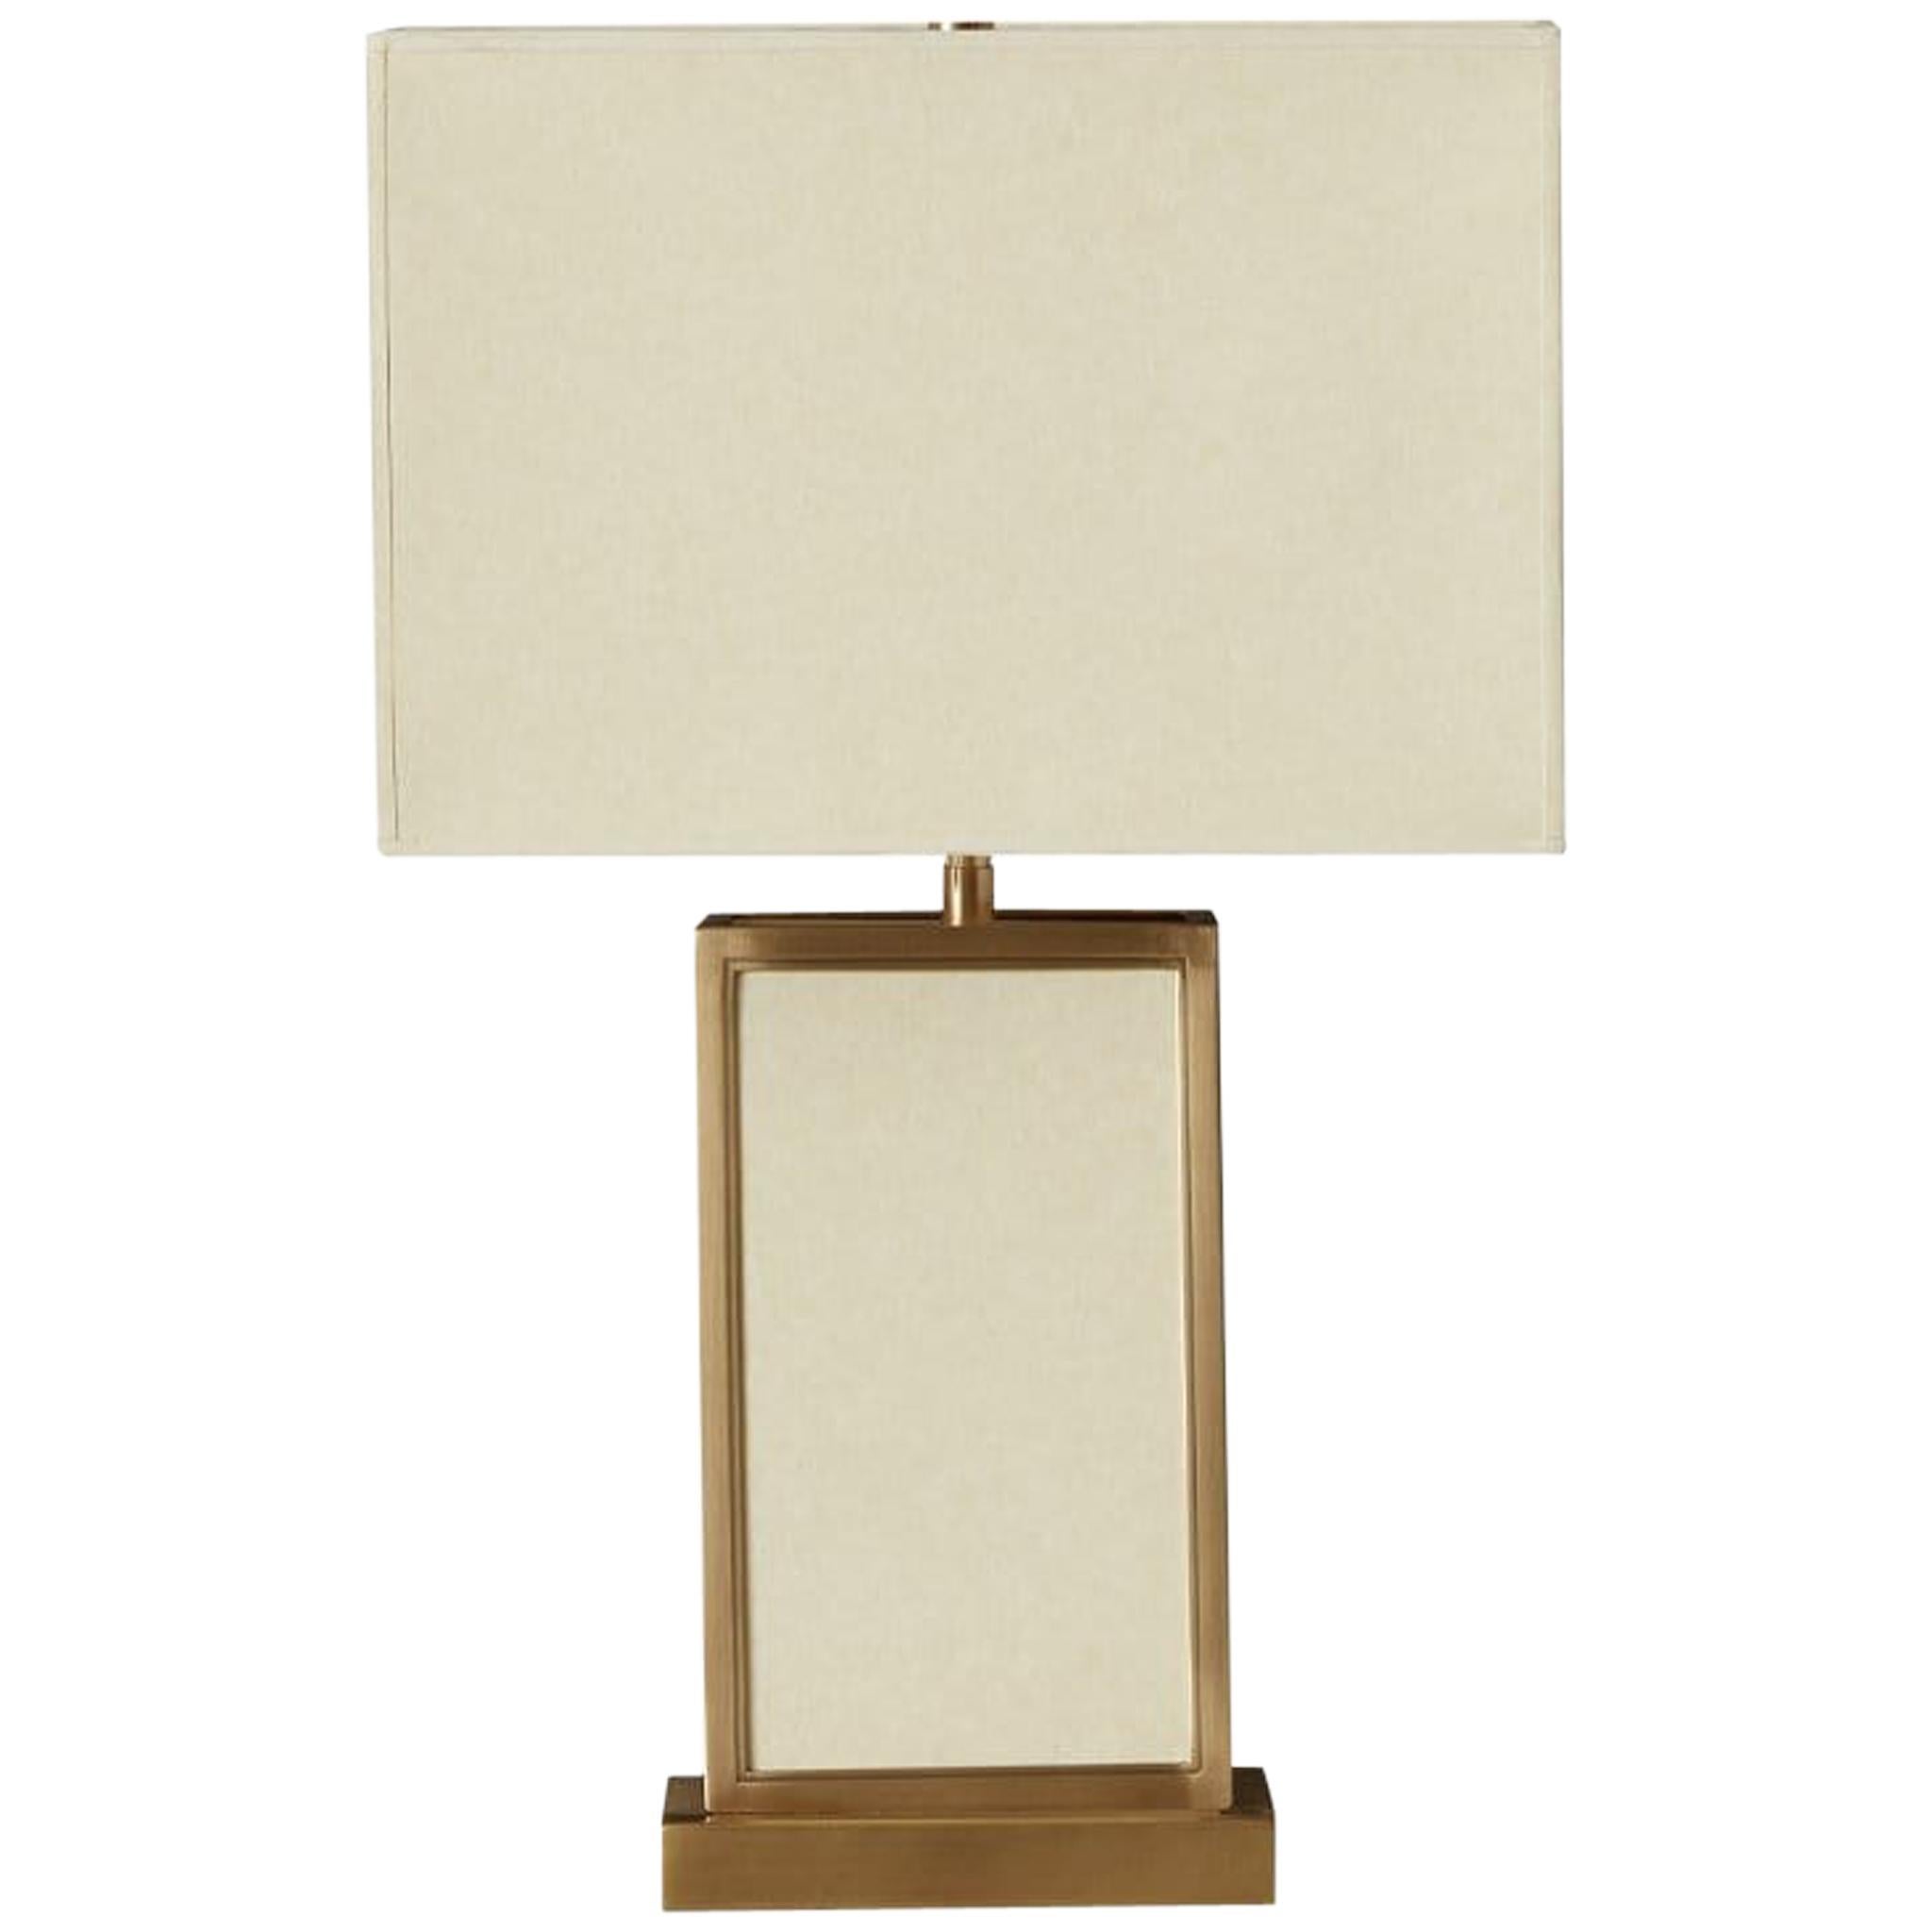 Ben Soleimani Small Ivar Table Lamp – Brass For Sale